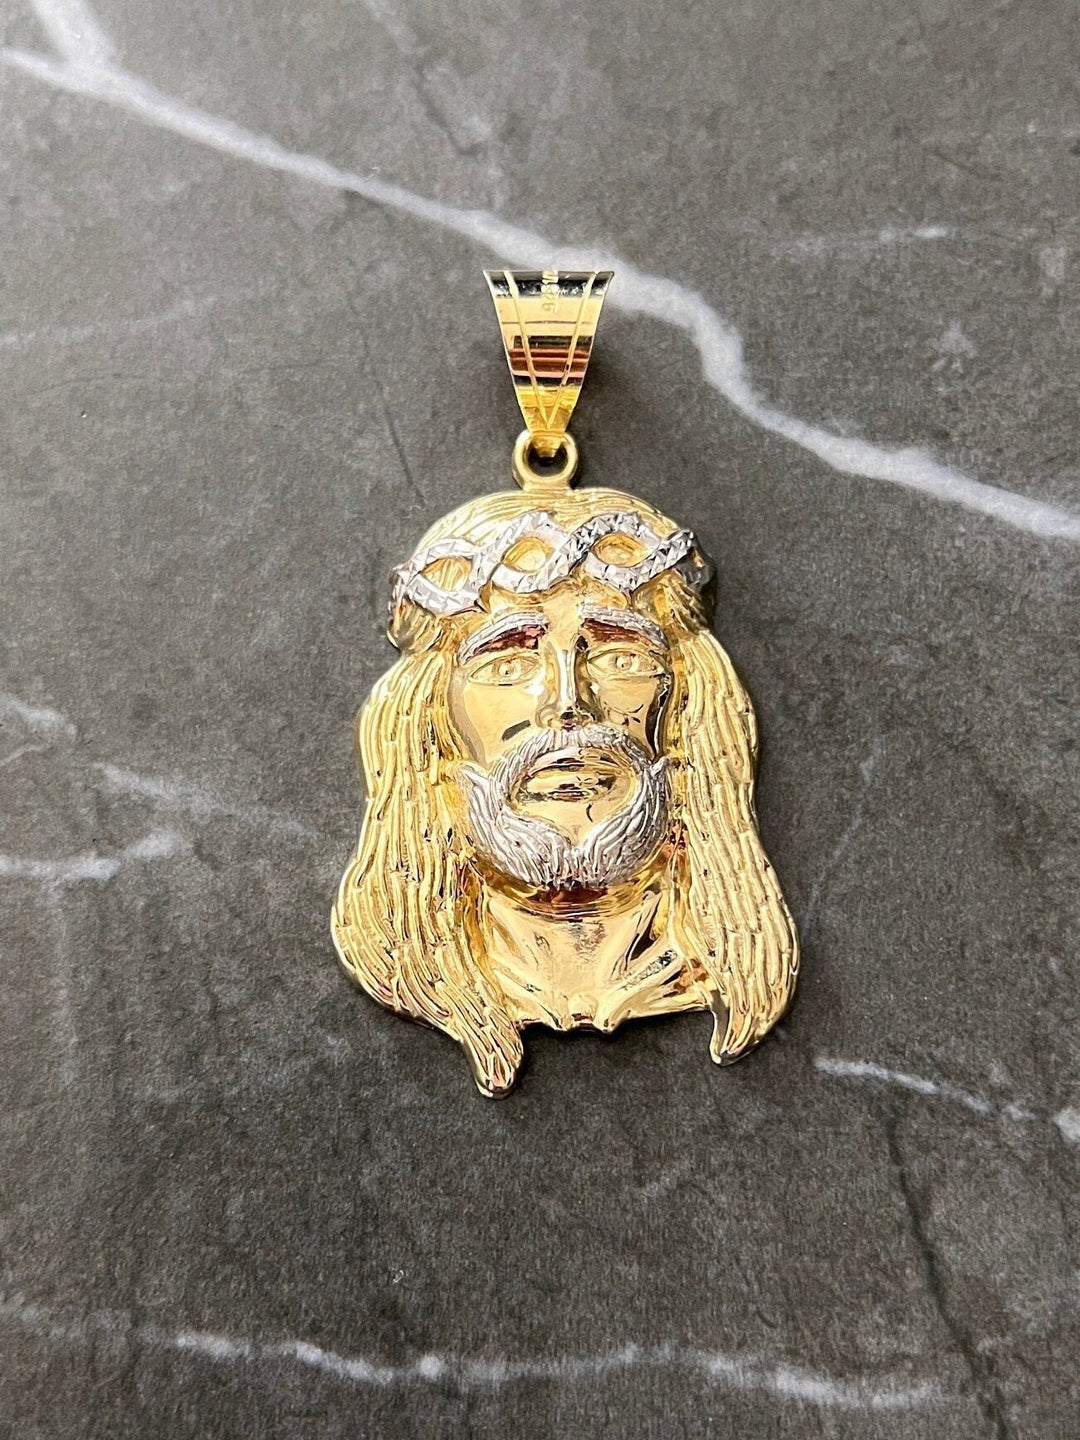 10K Yellow and White Gold .925 Sterling Silver Textured Diamond Cut Jesus Face/Head Charm/Pendant, The Face of Jesus Religious Gold Crown